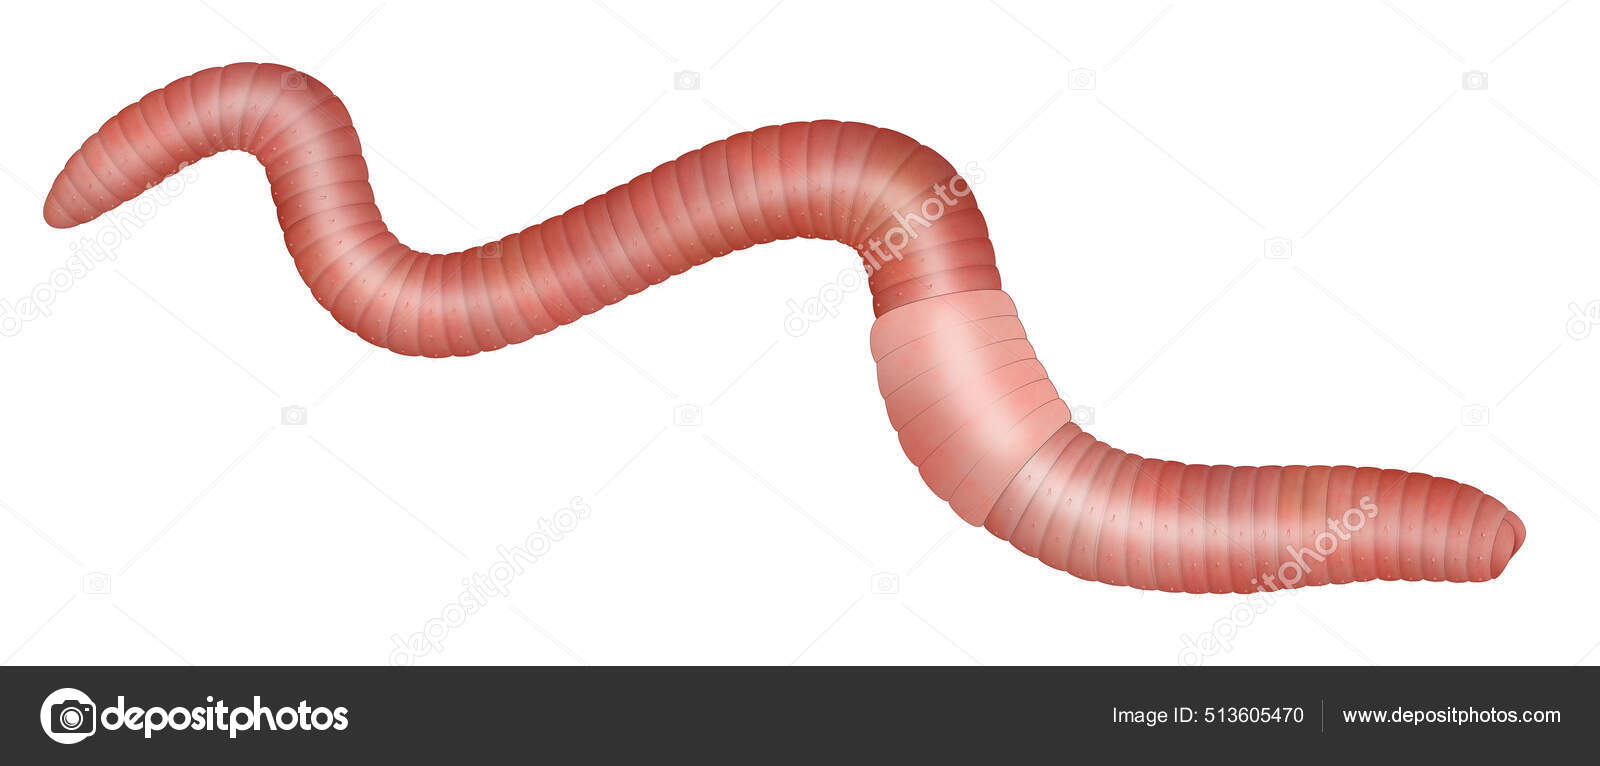 Common Earthworm Illustration White Background Stock Photo by